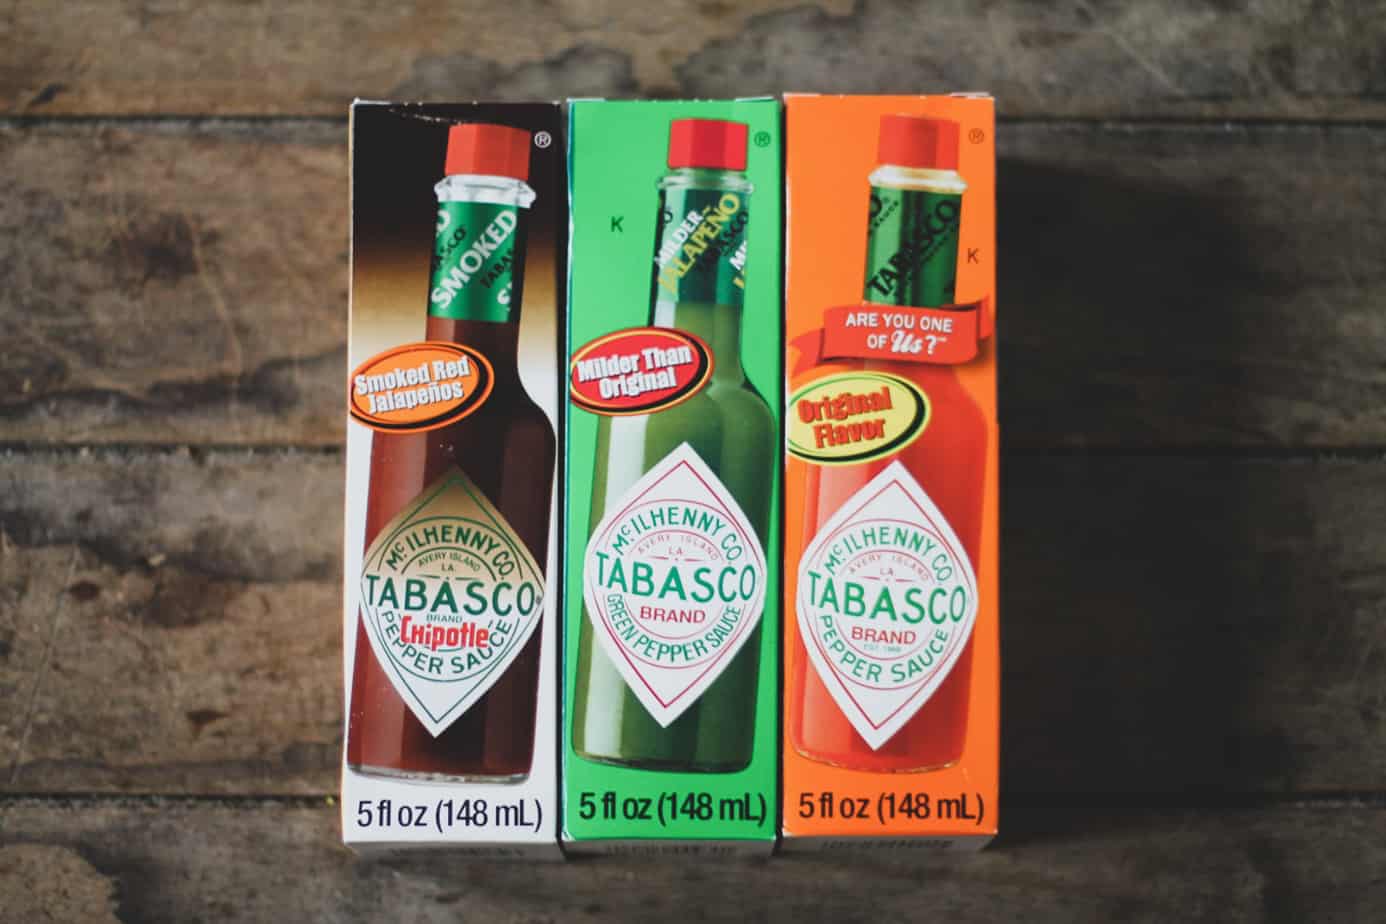 TABASCO products